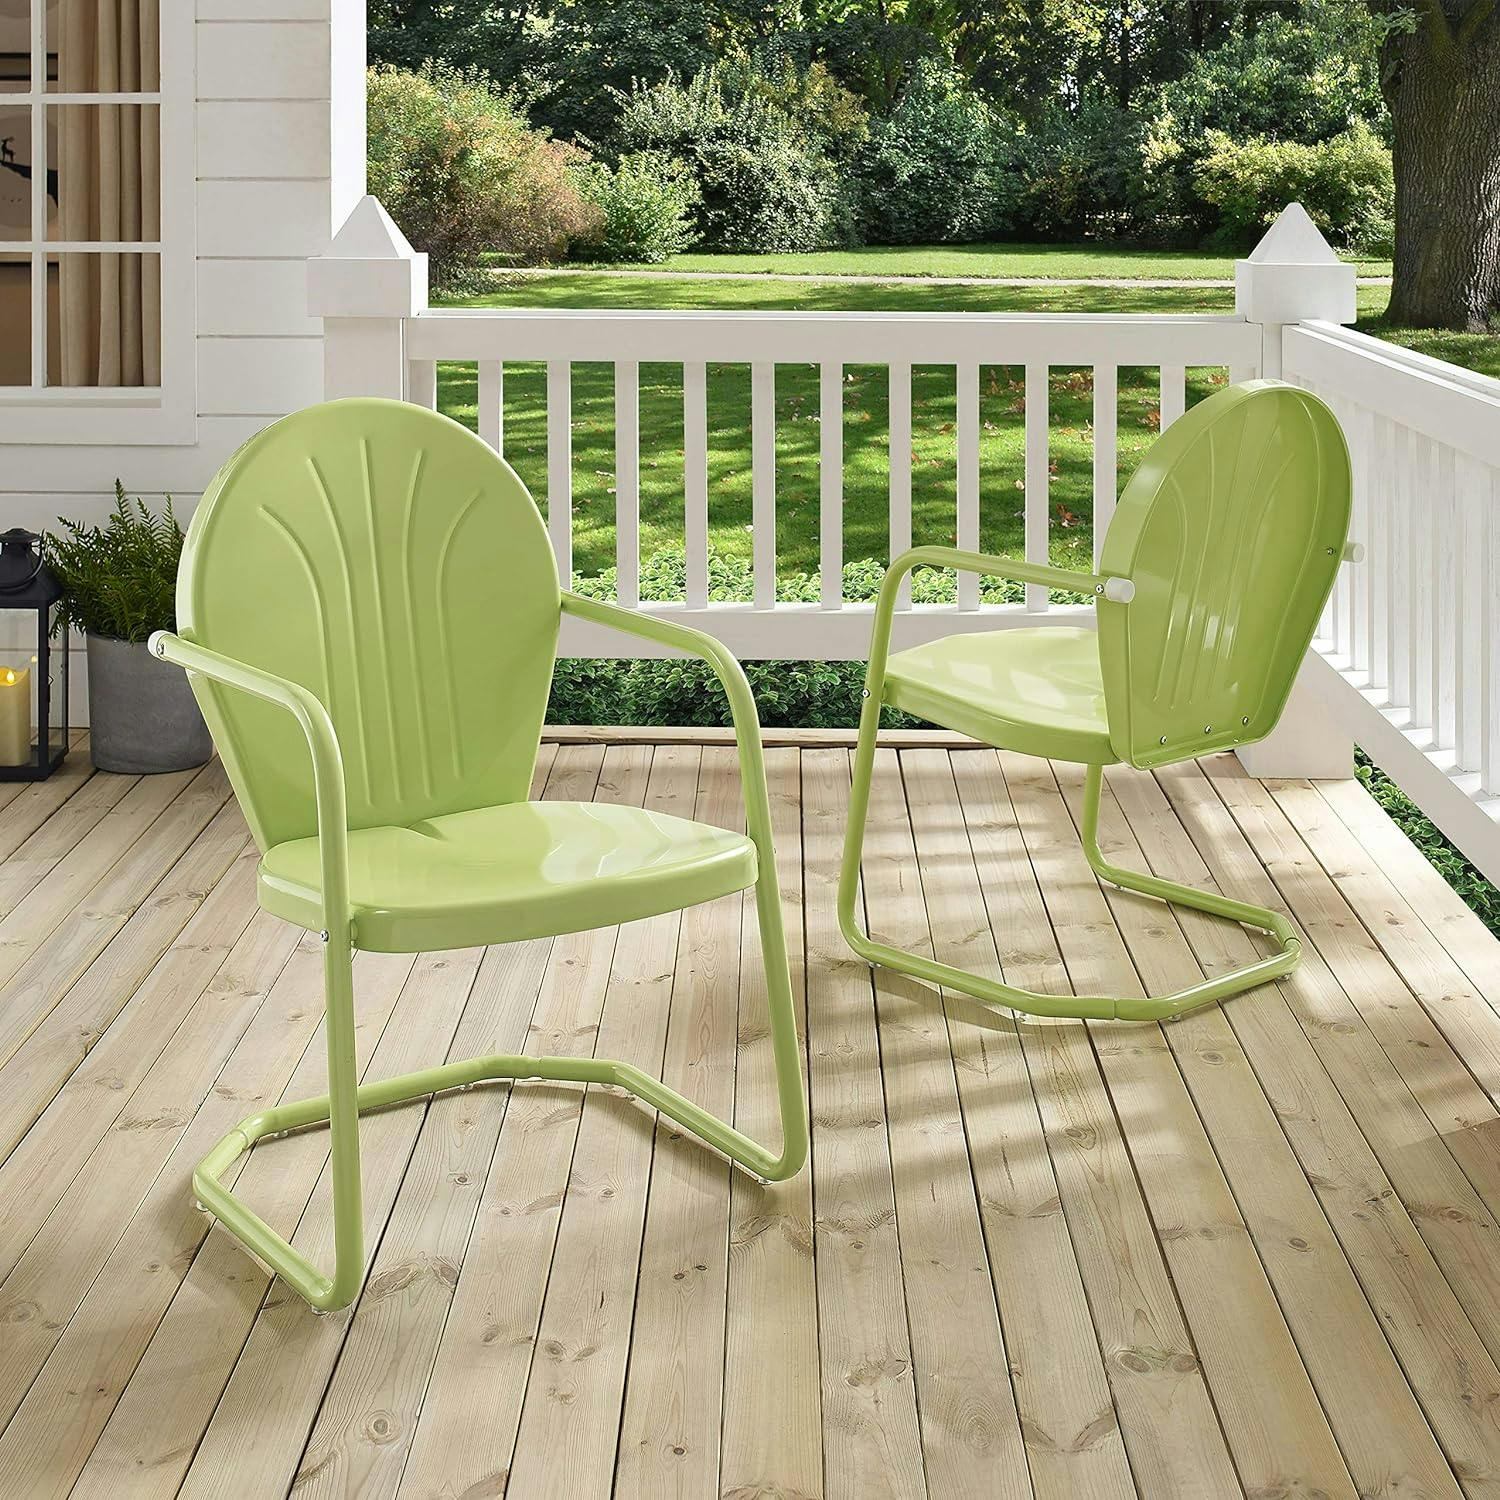 Key Lime Retro Metal Outdoor Lounge Chair